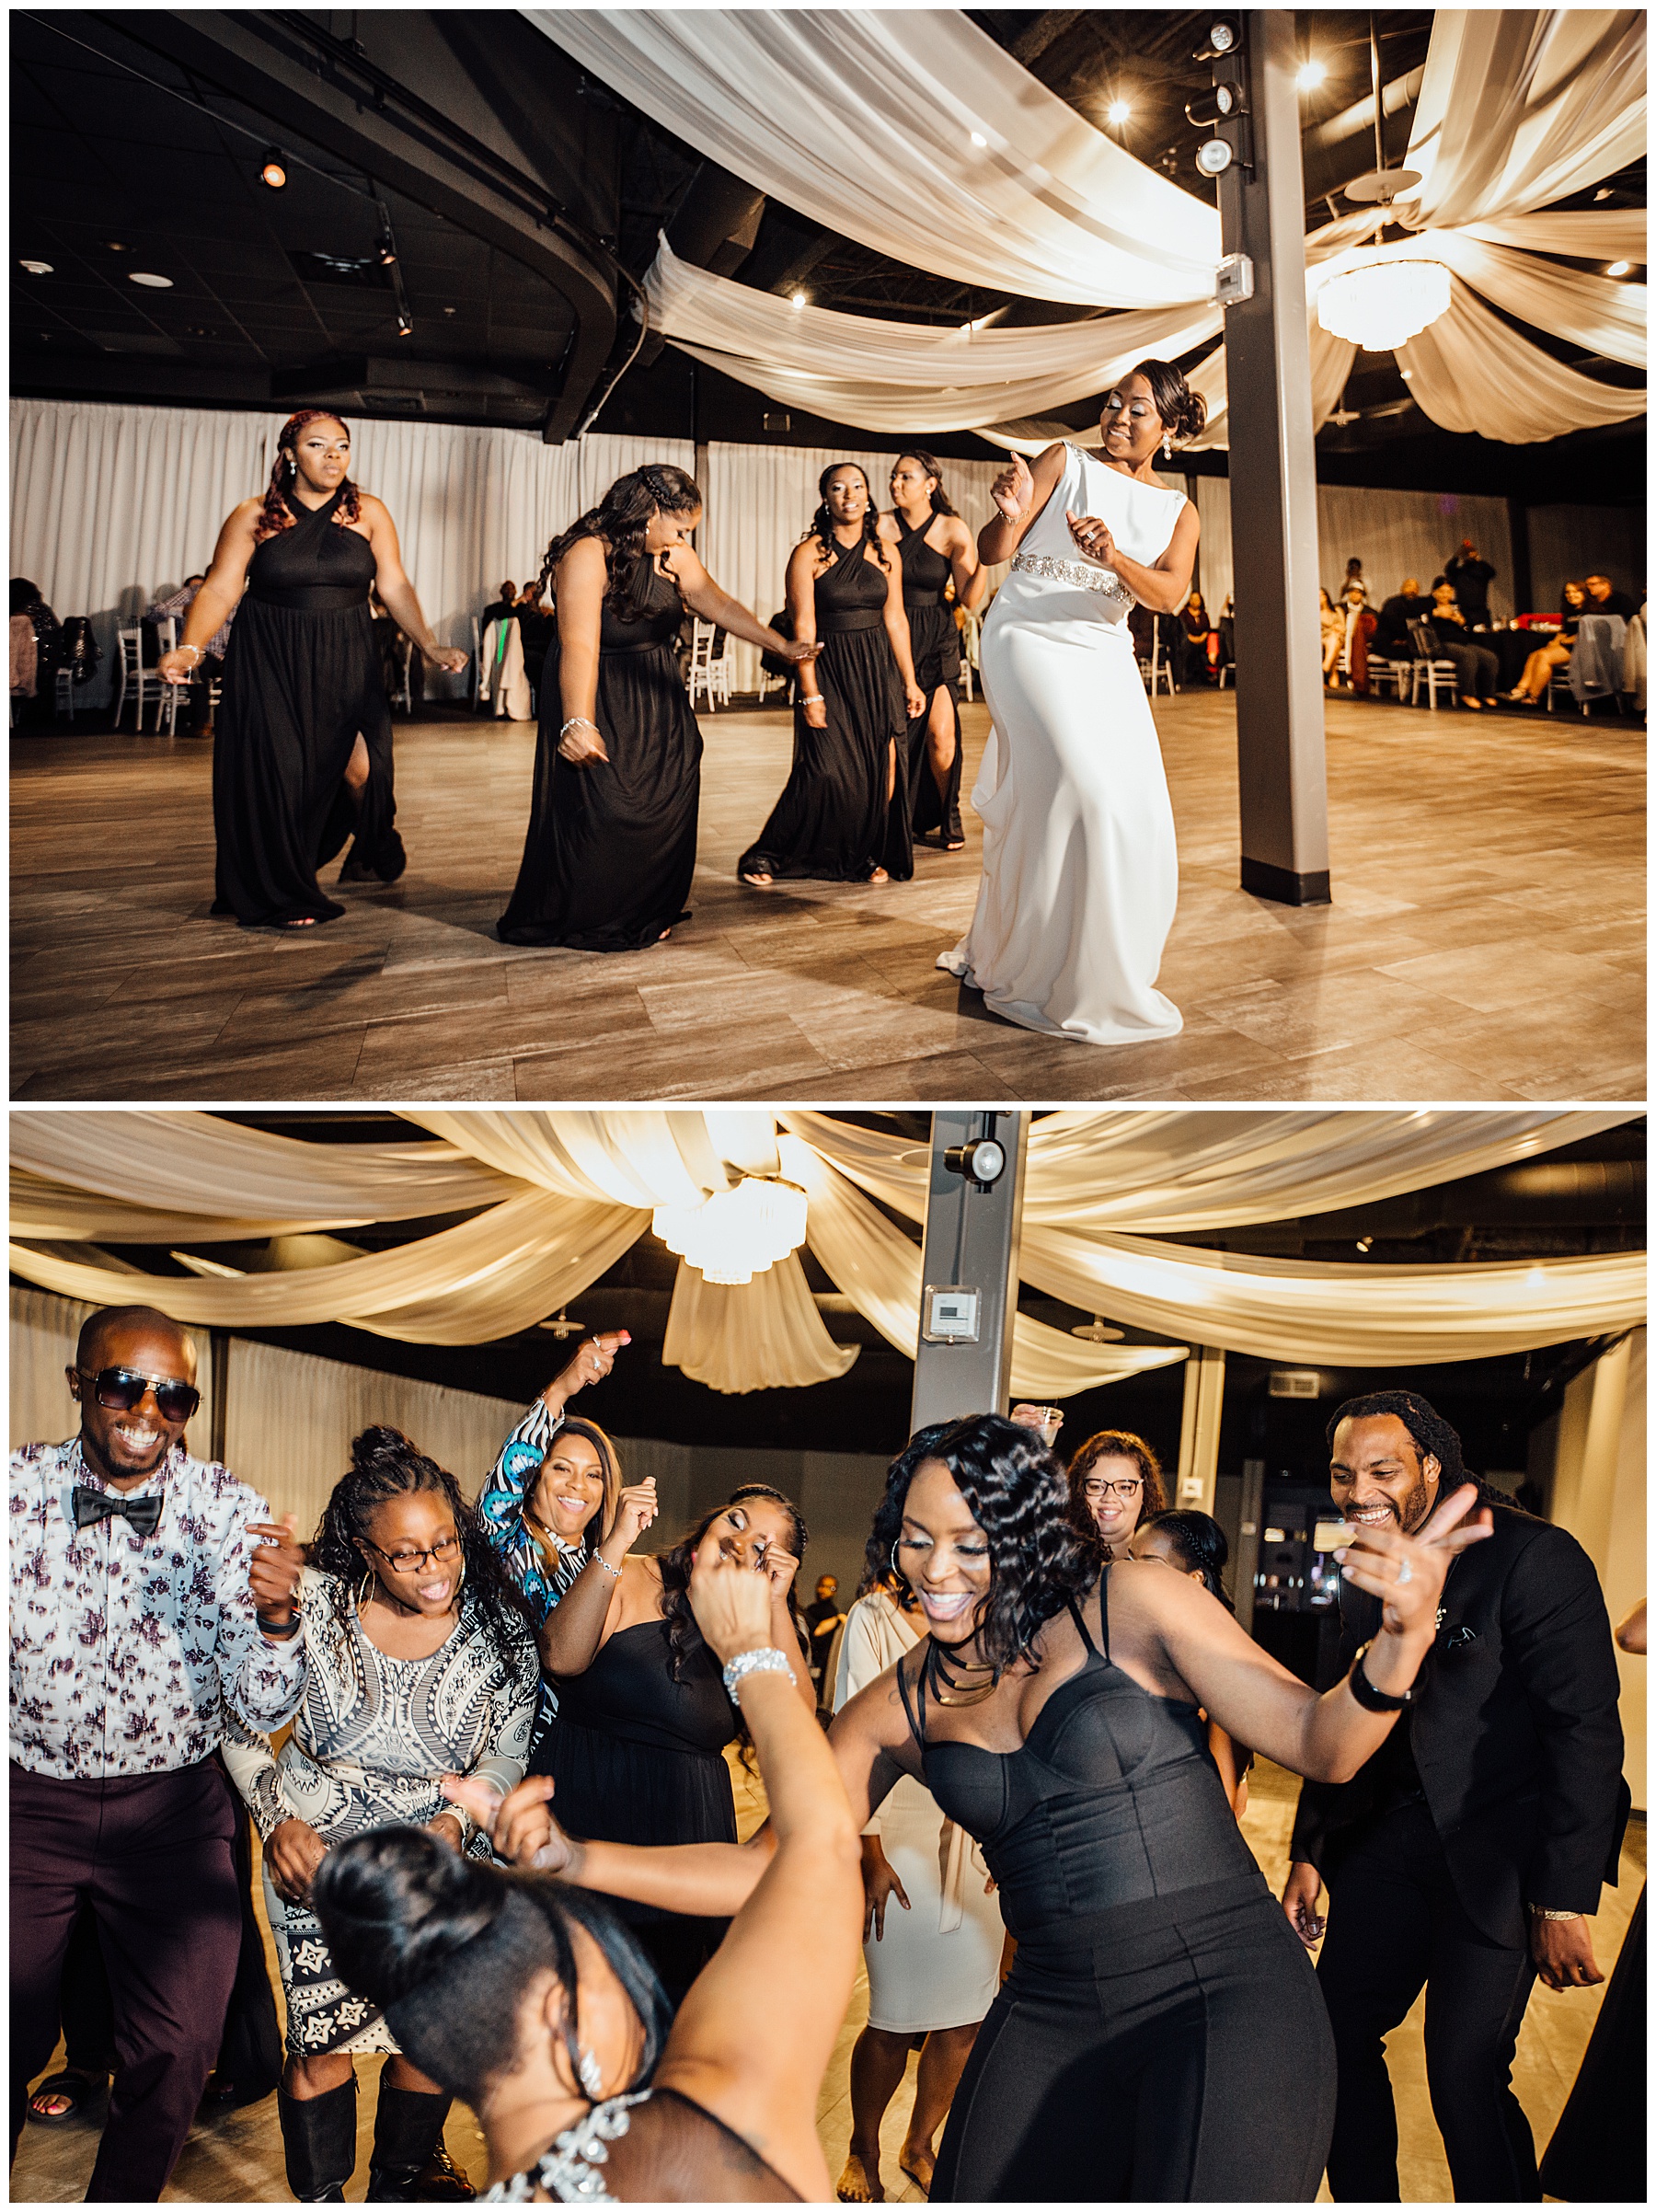 Dancing photos at the Soiree Room